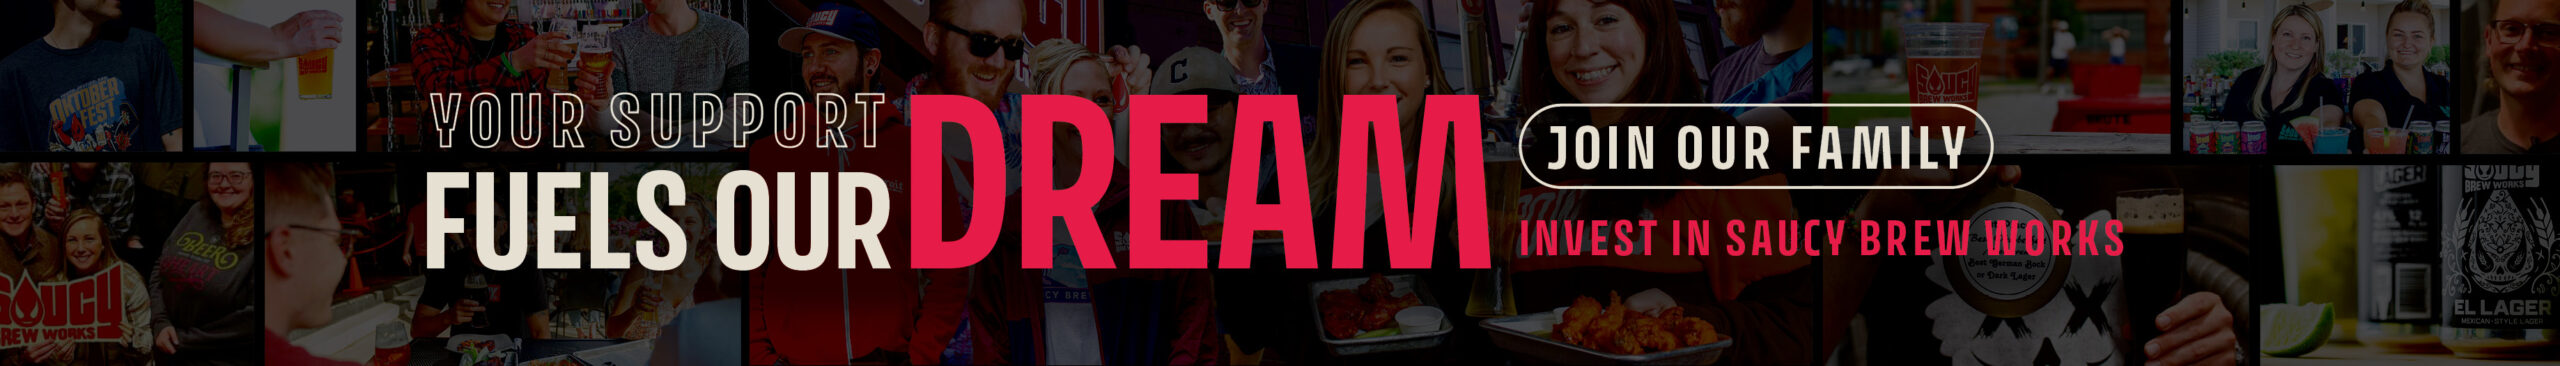 Fuel Our Dream. Join Our Family. Invest in Saucy.